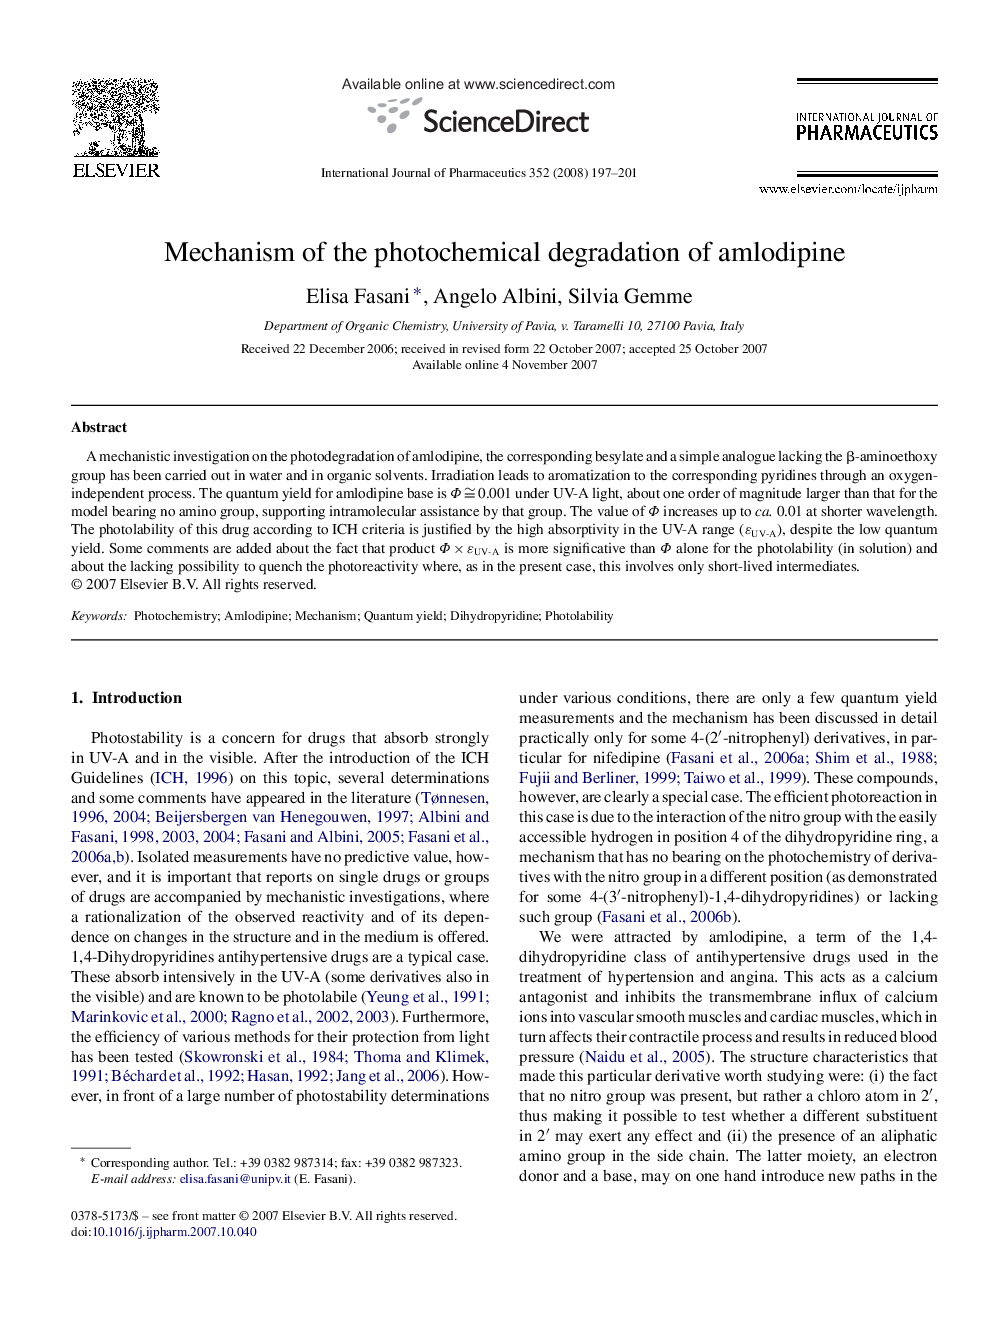 Mechanism of the photochemical degradation of amlodipine